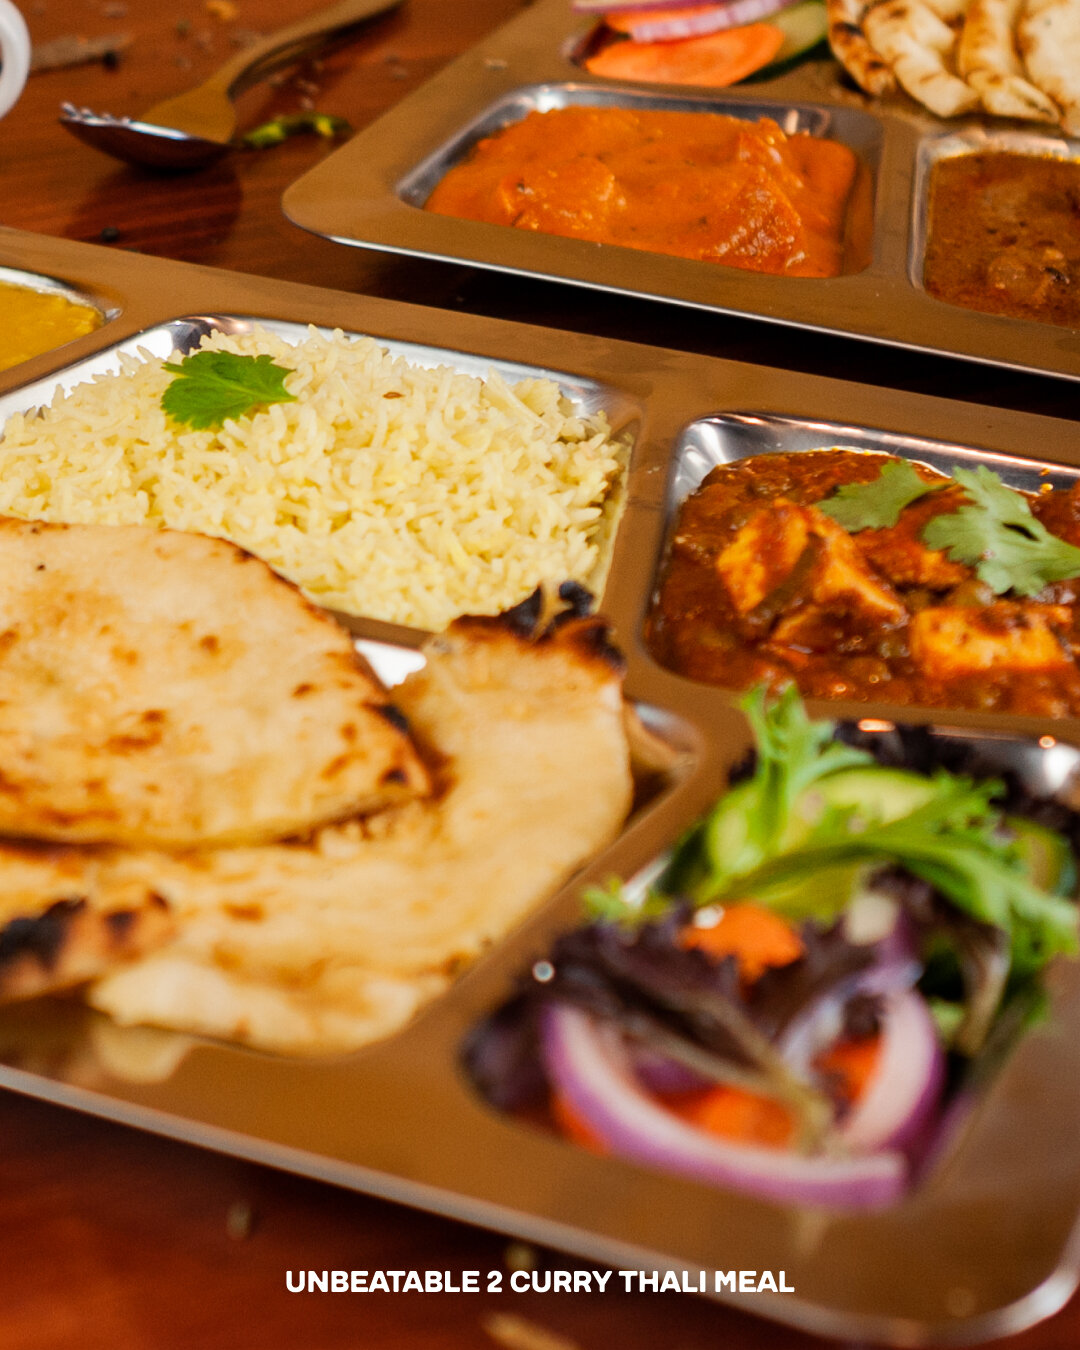 🍽️ Satisfy your hunger with a hearty Thali dhaba curry meal! 

#curry #thali #indiancuisine #foodie #yum

Order online or Drop in ➽ link in bio.

☺︎

OPENING HOURS
MON, WED, THUR, FRI, SAT: 11:30am - 10:30pm
SUN: 10:30am - 10:30pm
TUE: Closed

Conta